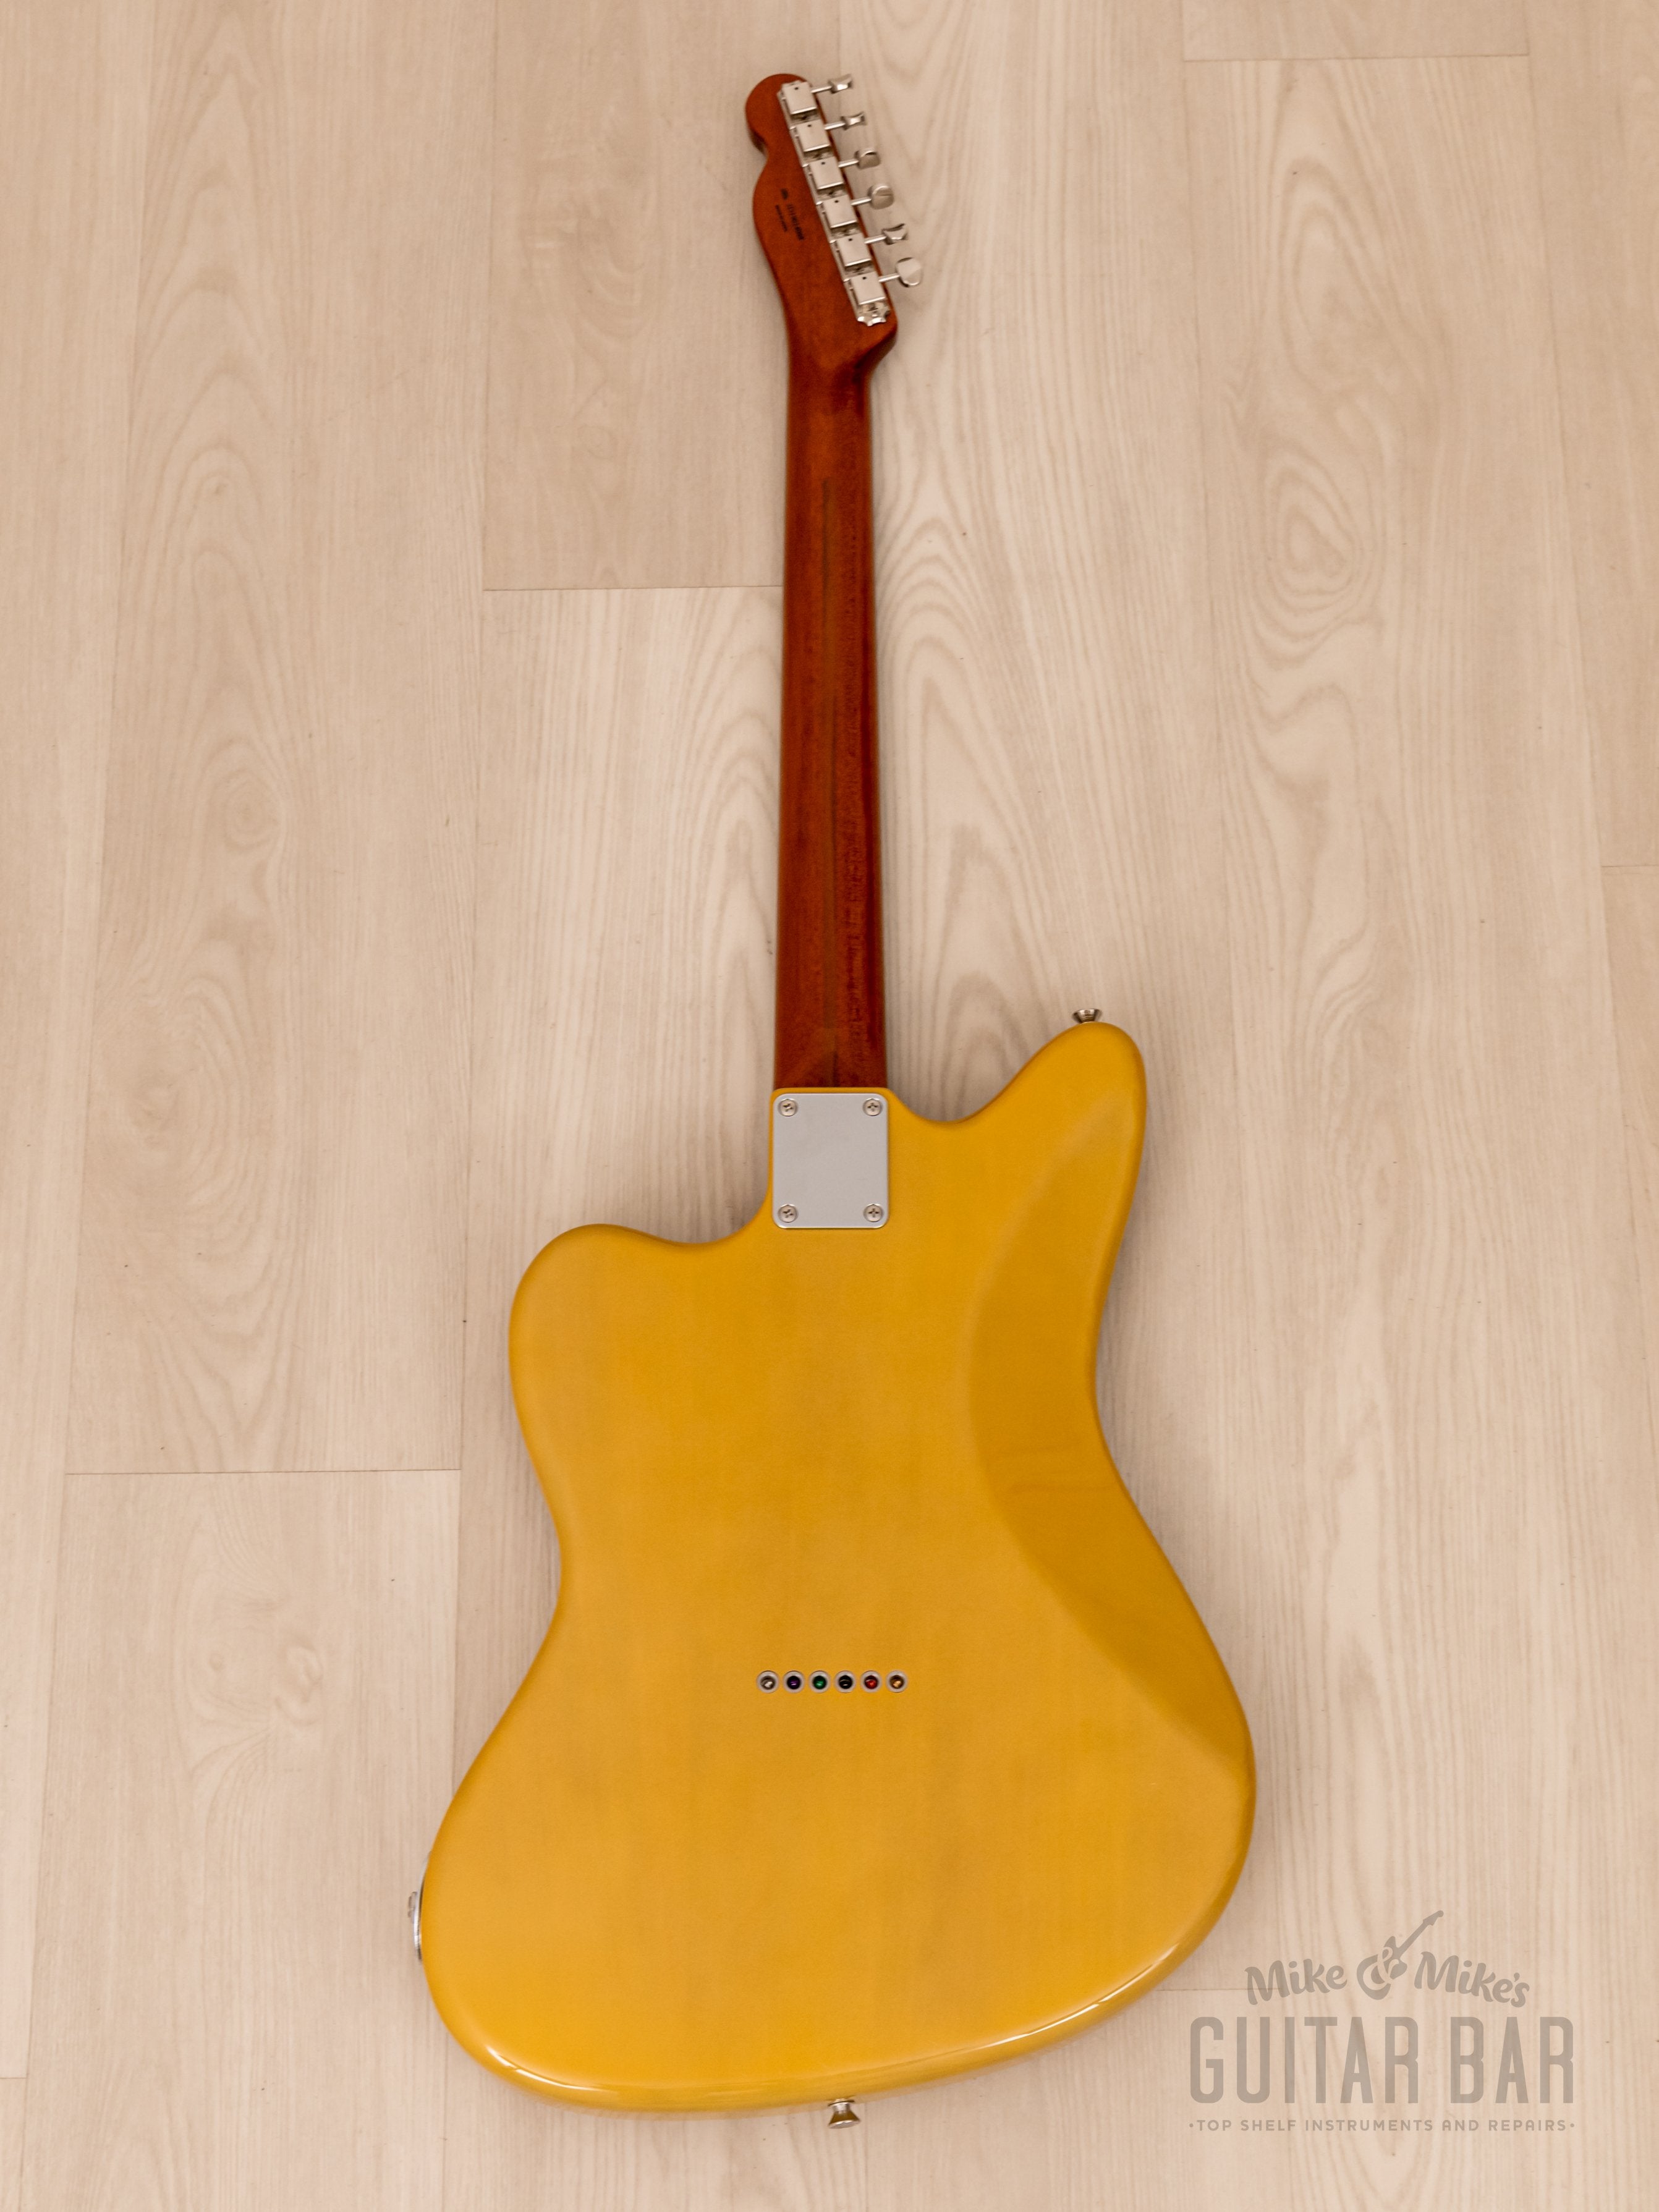 2019 Fender Limited Mahogany Offset Telecaster P90 Butterscotch 